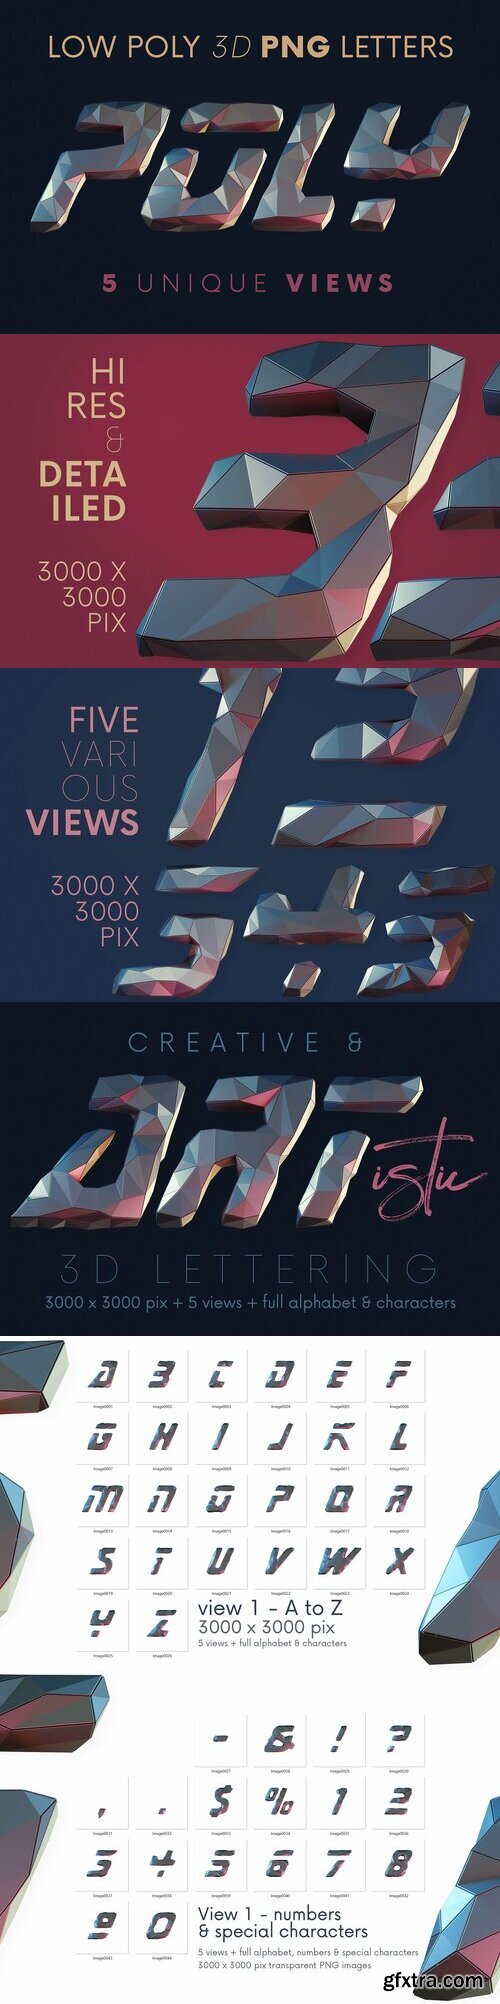 Creativemarket - Future Low Poly - 3D Lettering 12173910